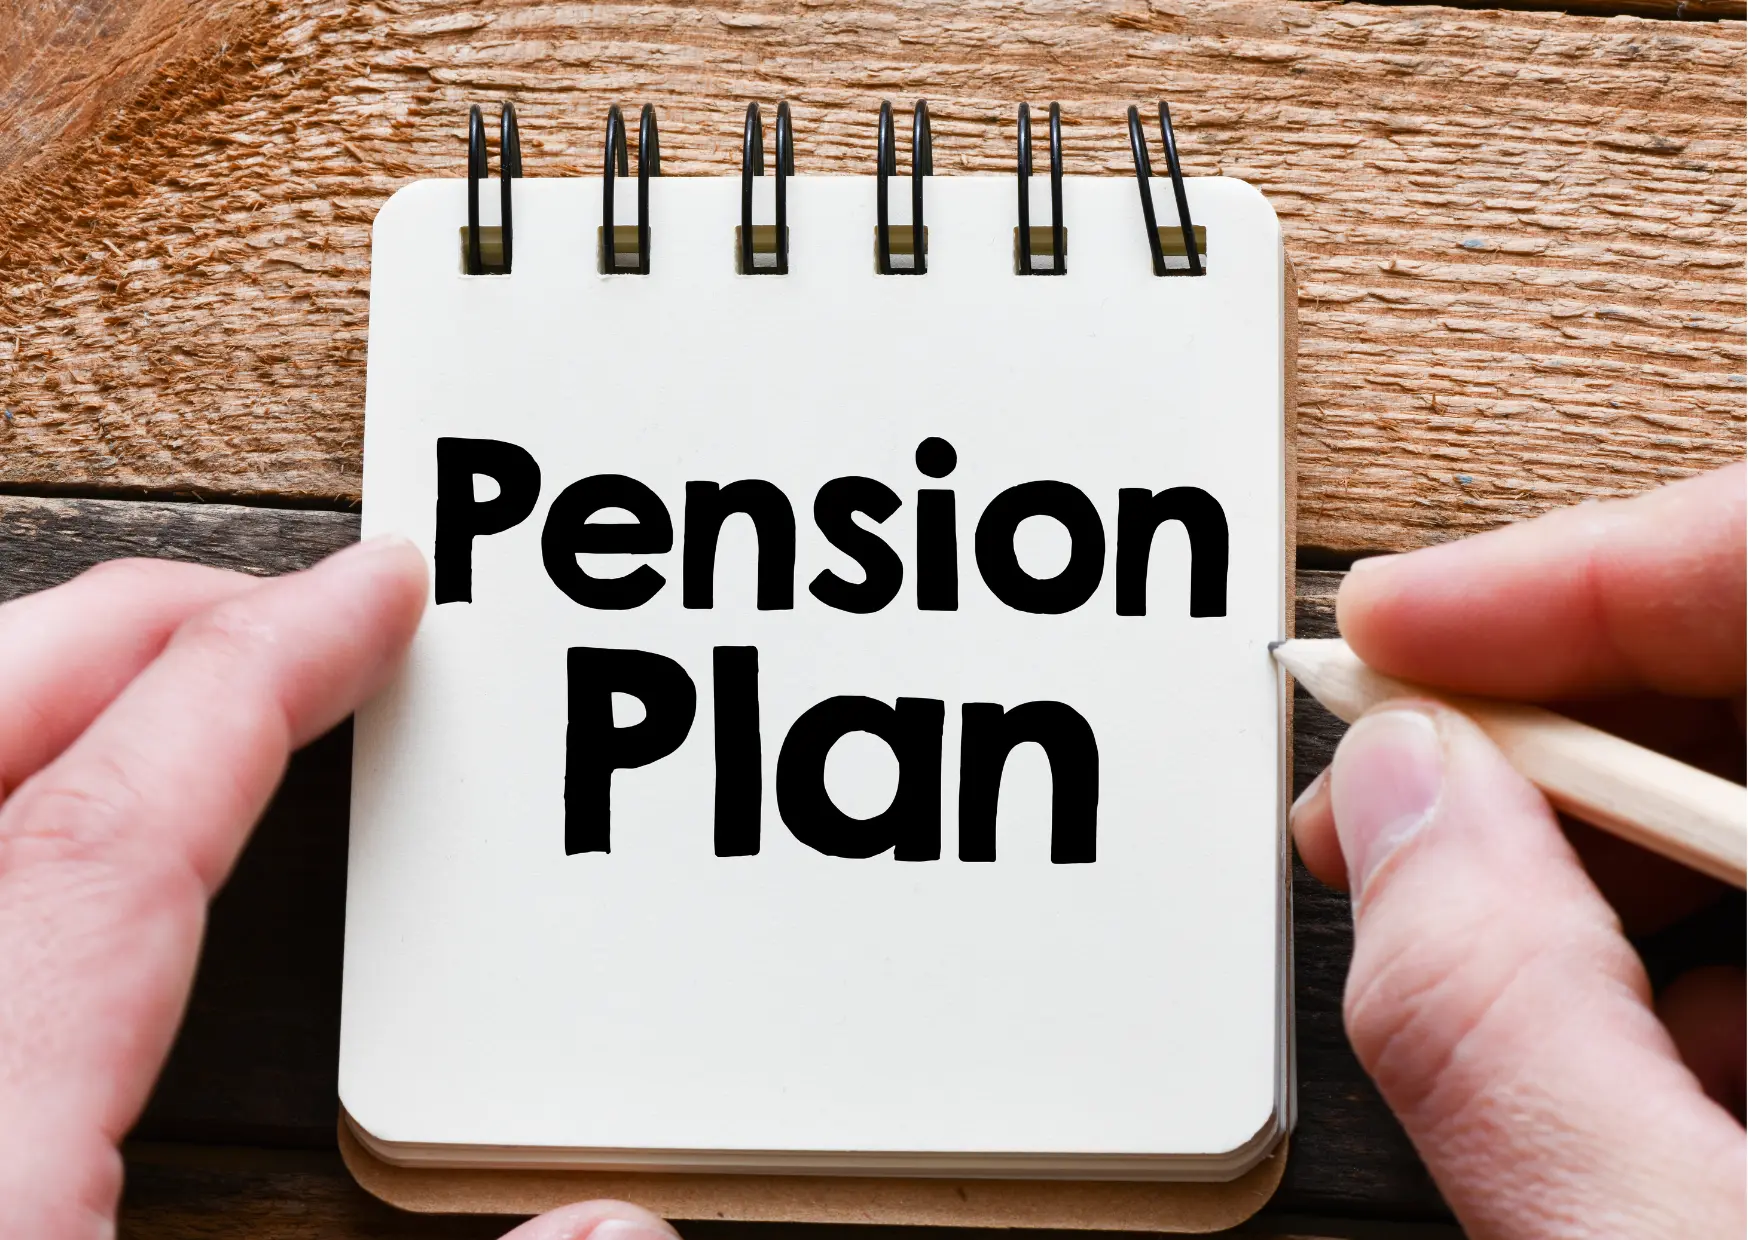 Free pension review - always check it